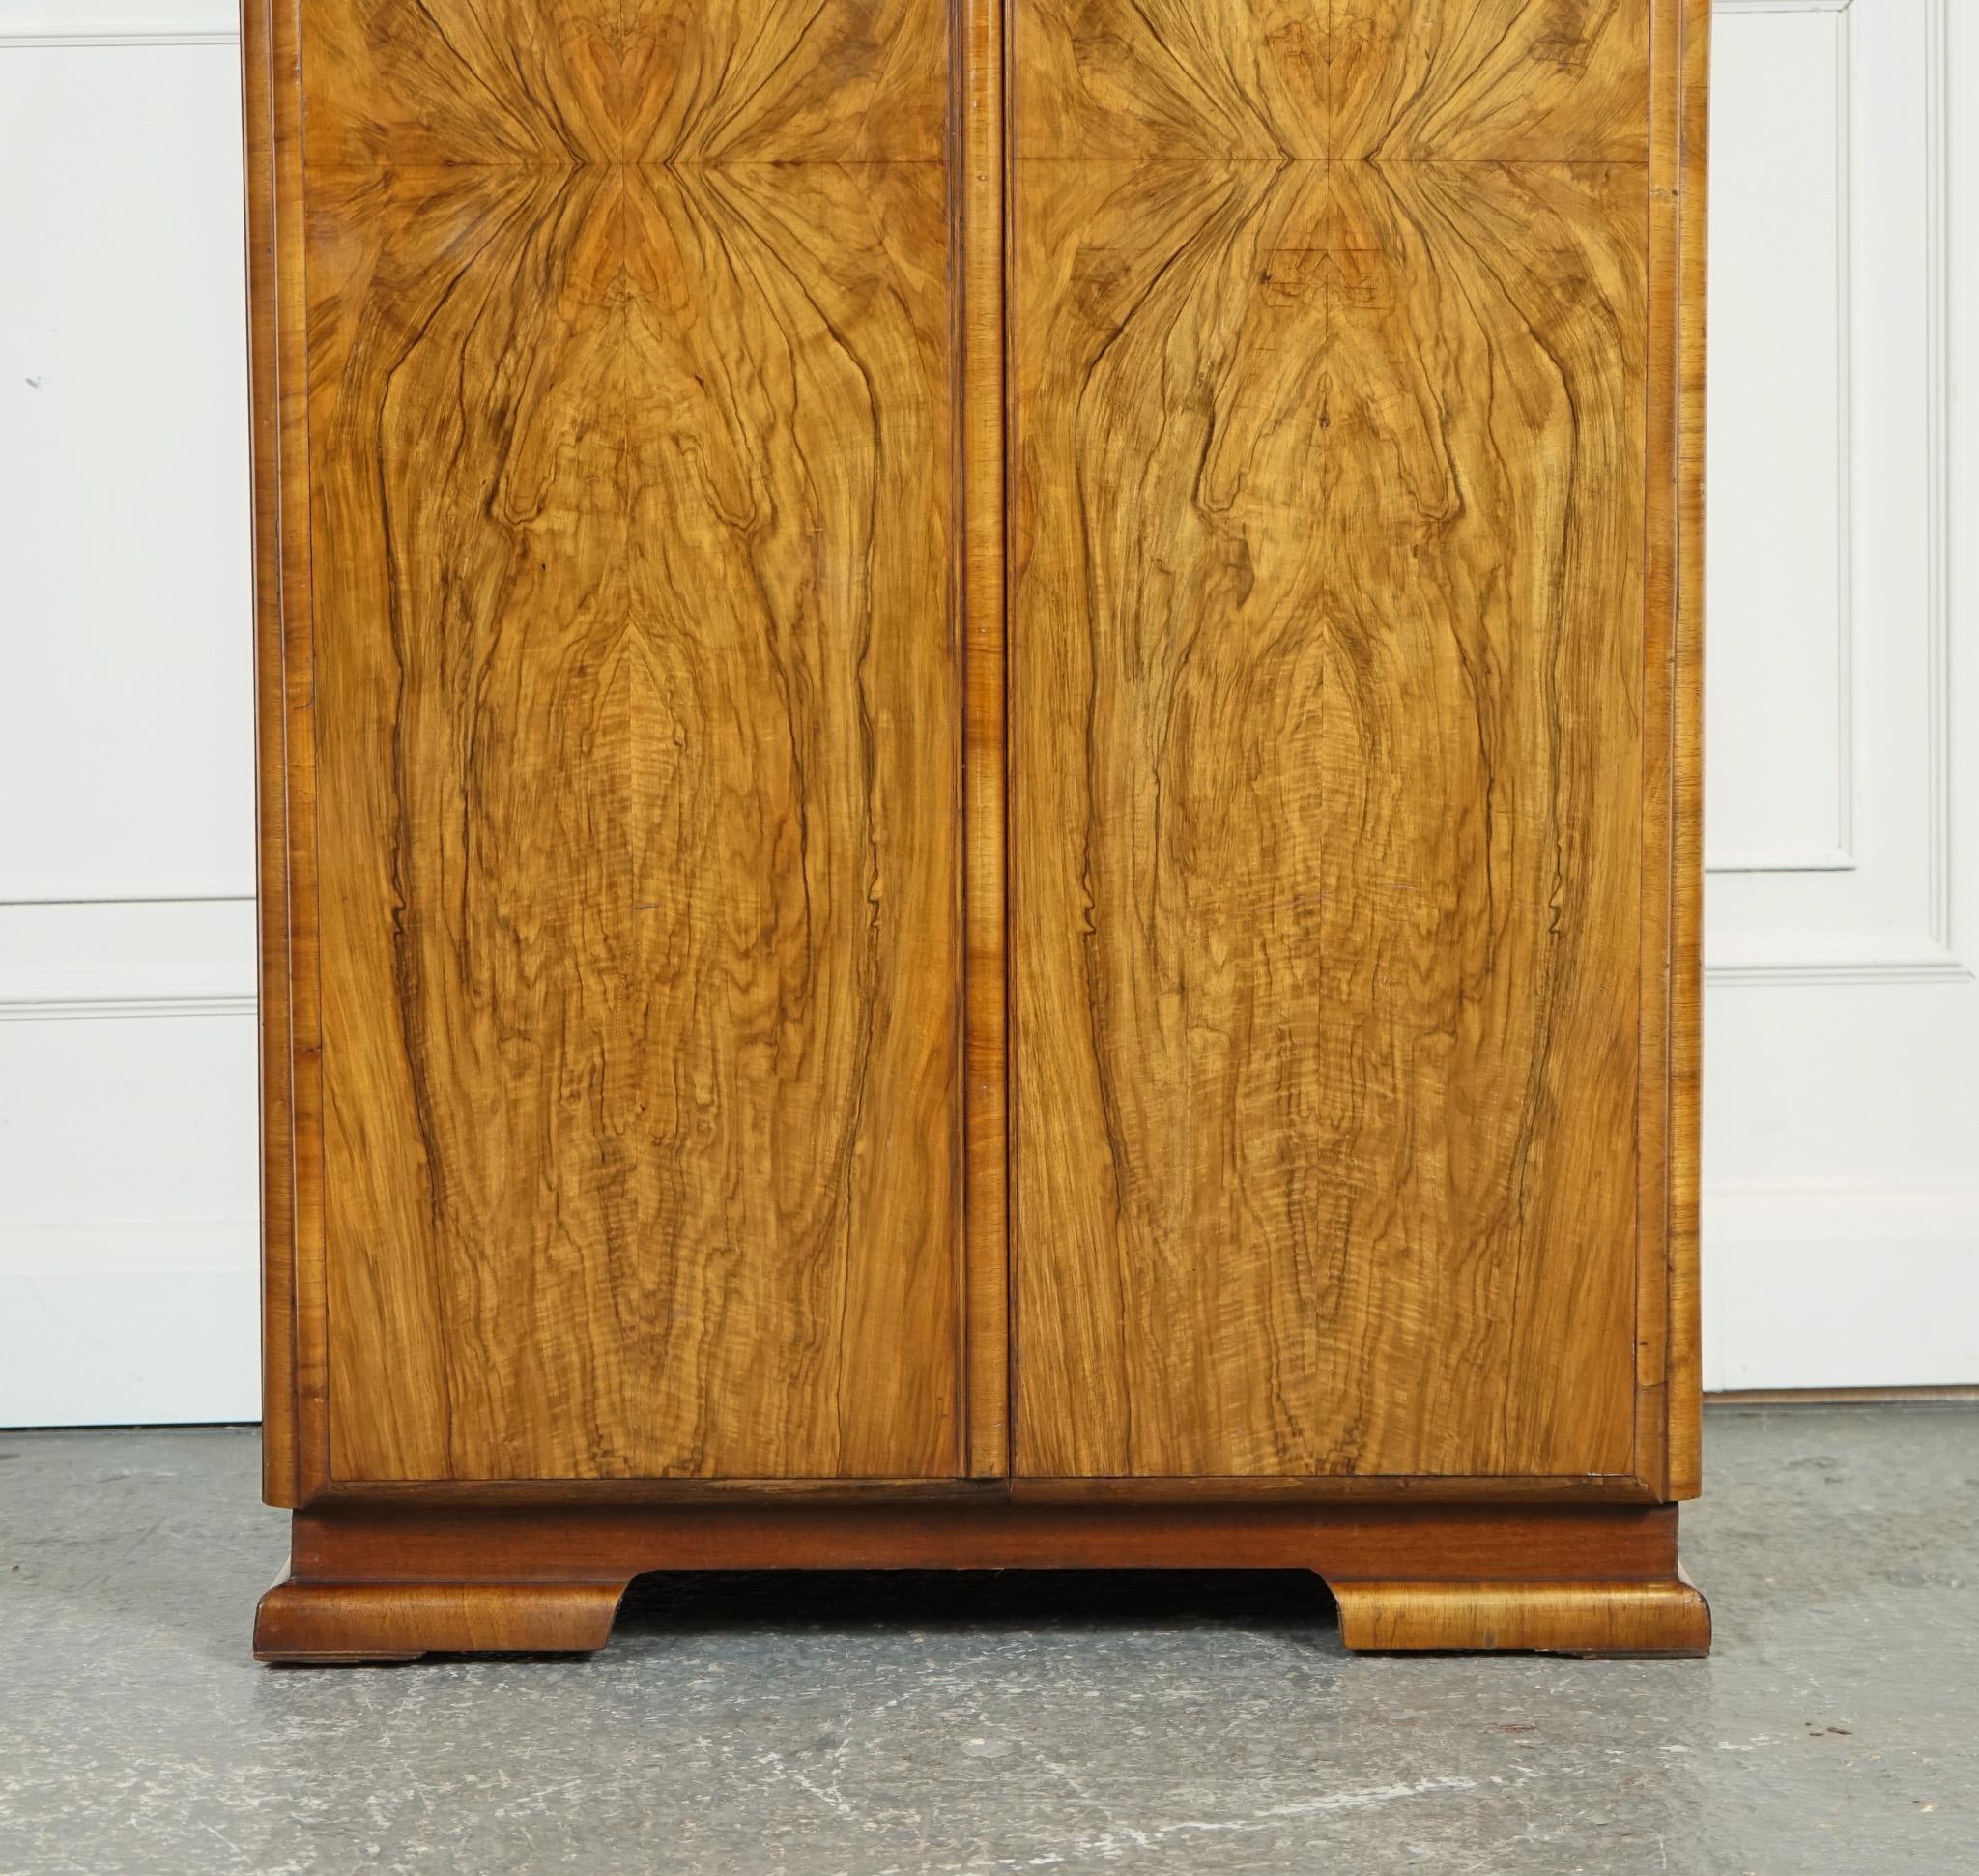 LOVELY SMALL COMPACT ART DECO BURR WALNuT WARDROBE In Good Condition For Sale In Pulborough, GB